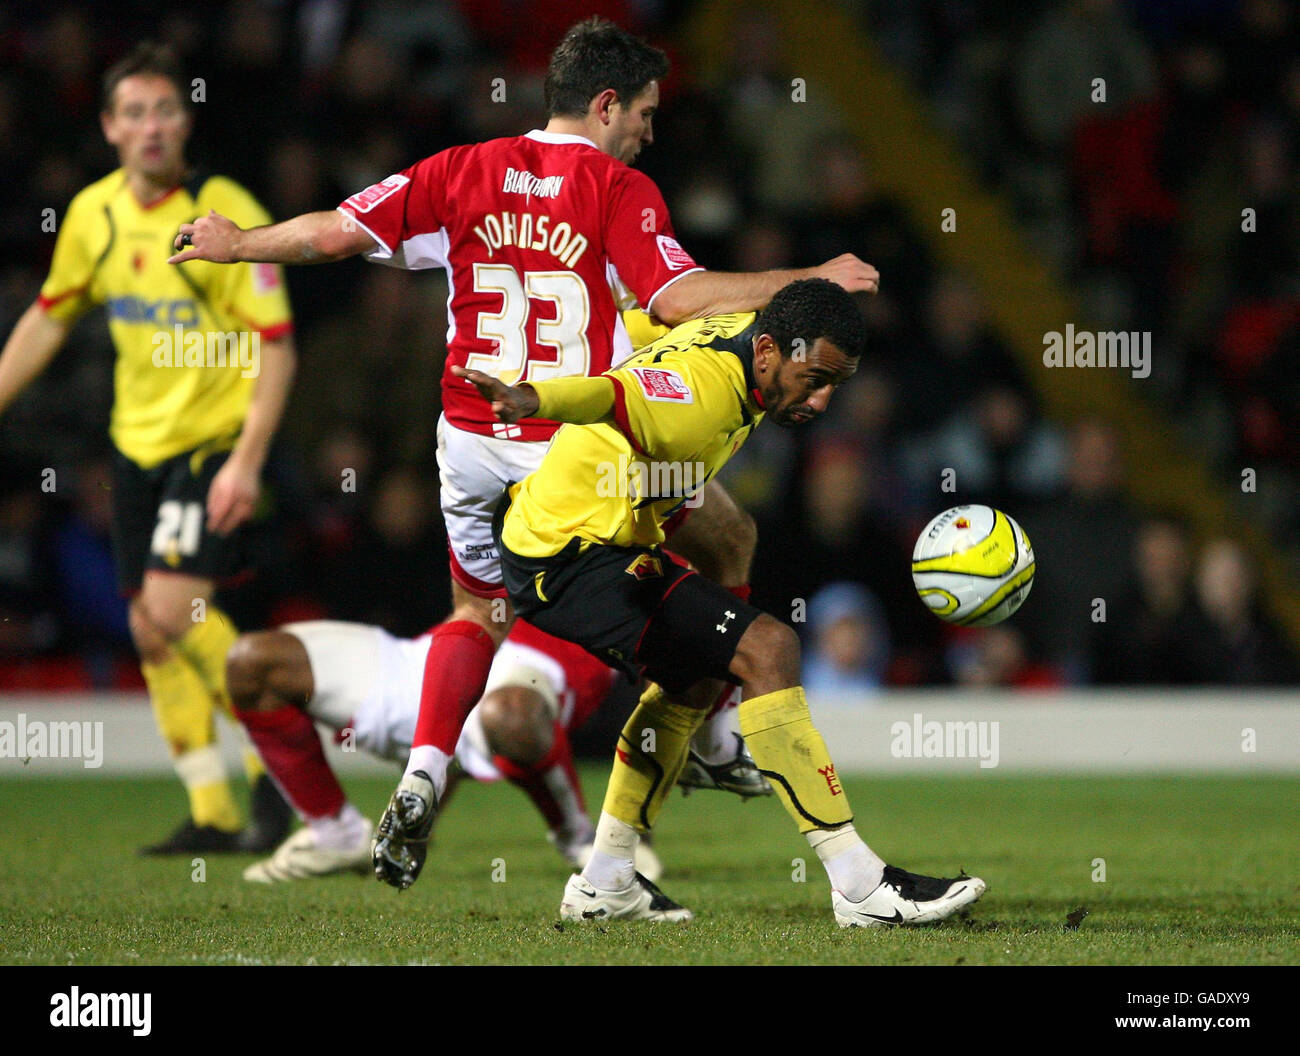 Watford's Lee Williamson (right) and Bristol City's Lee Johnson battle for the ball during the Coca-Cola Football League Championship match at Vicarage Road, Watford. Stock Photo